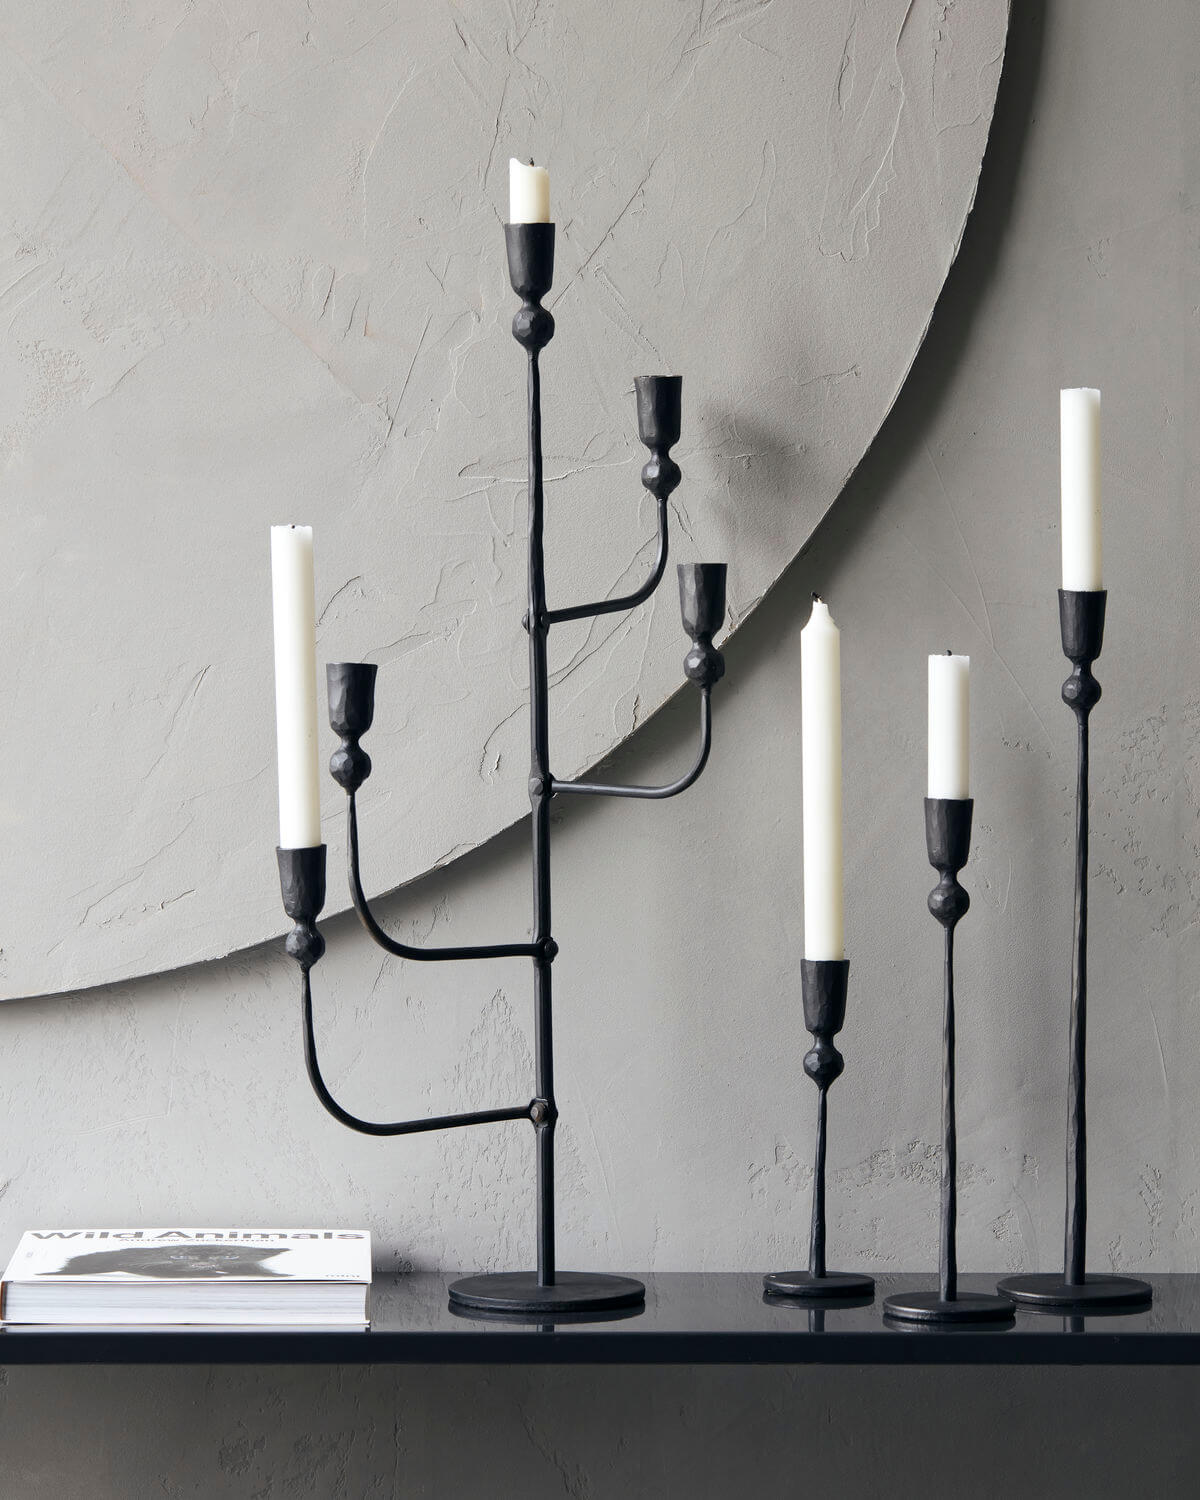 Candle Holder | Medium | Trivo | Black | by House Doctor - Lifestory - House Doctor